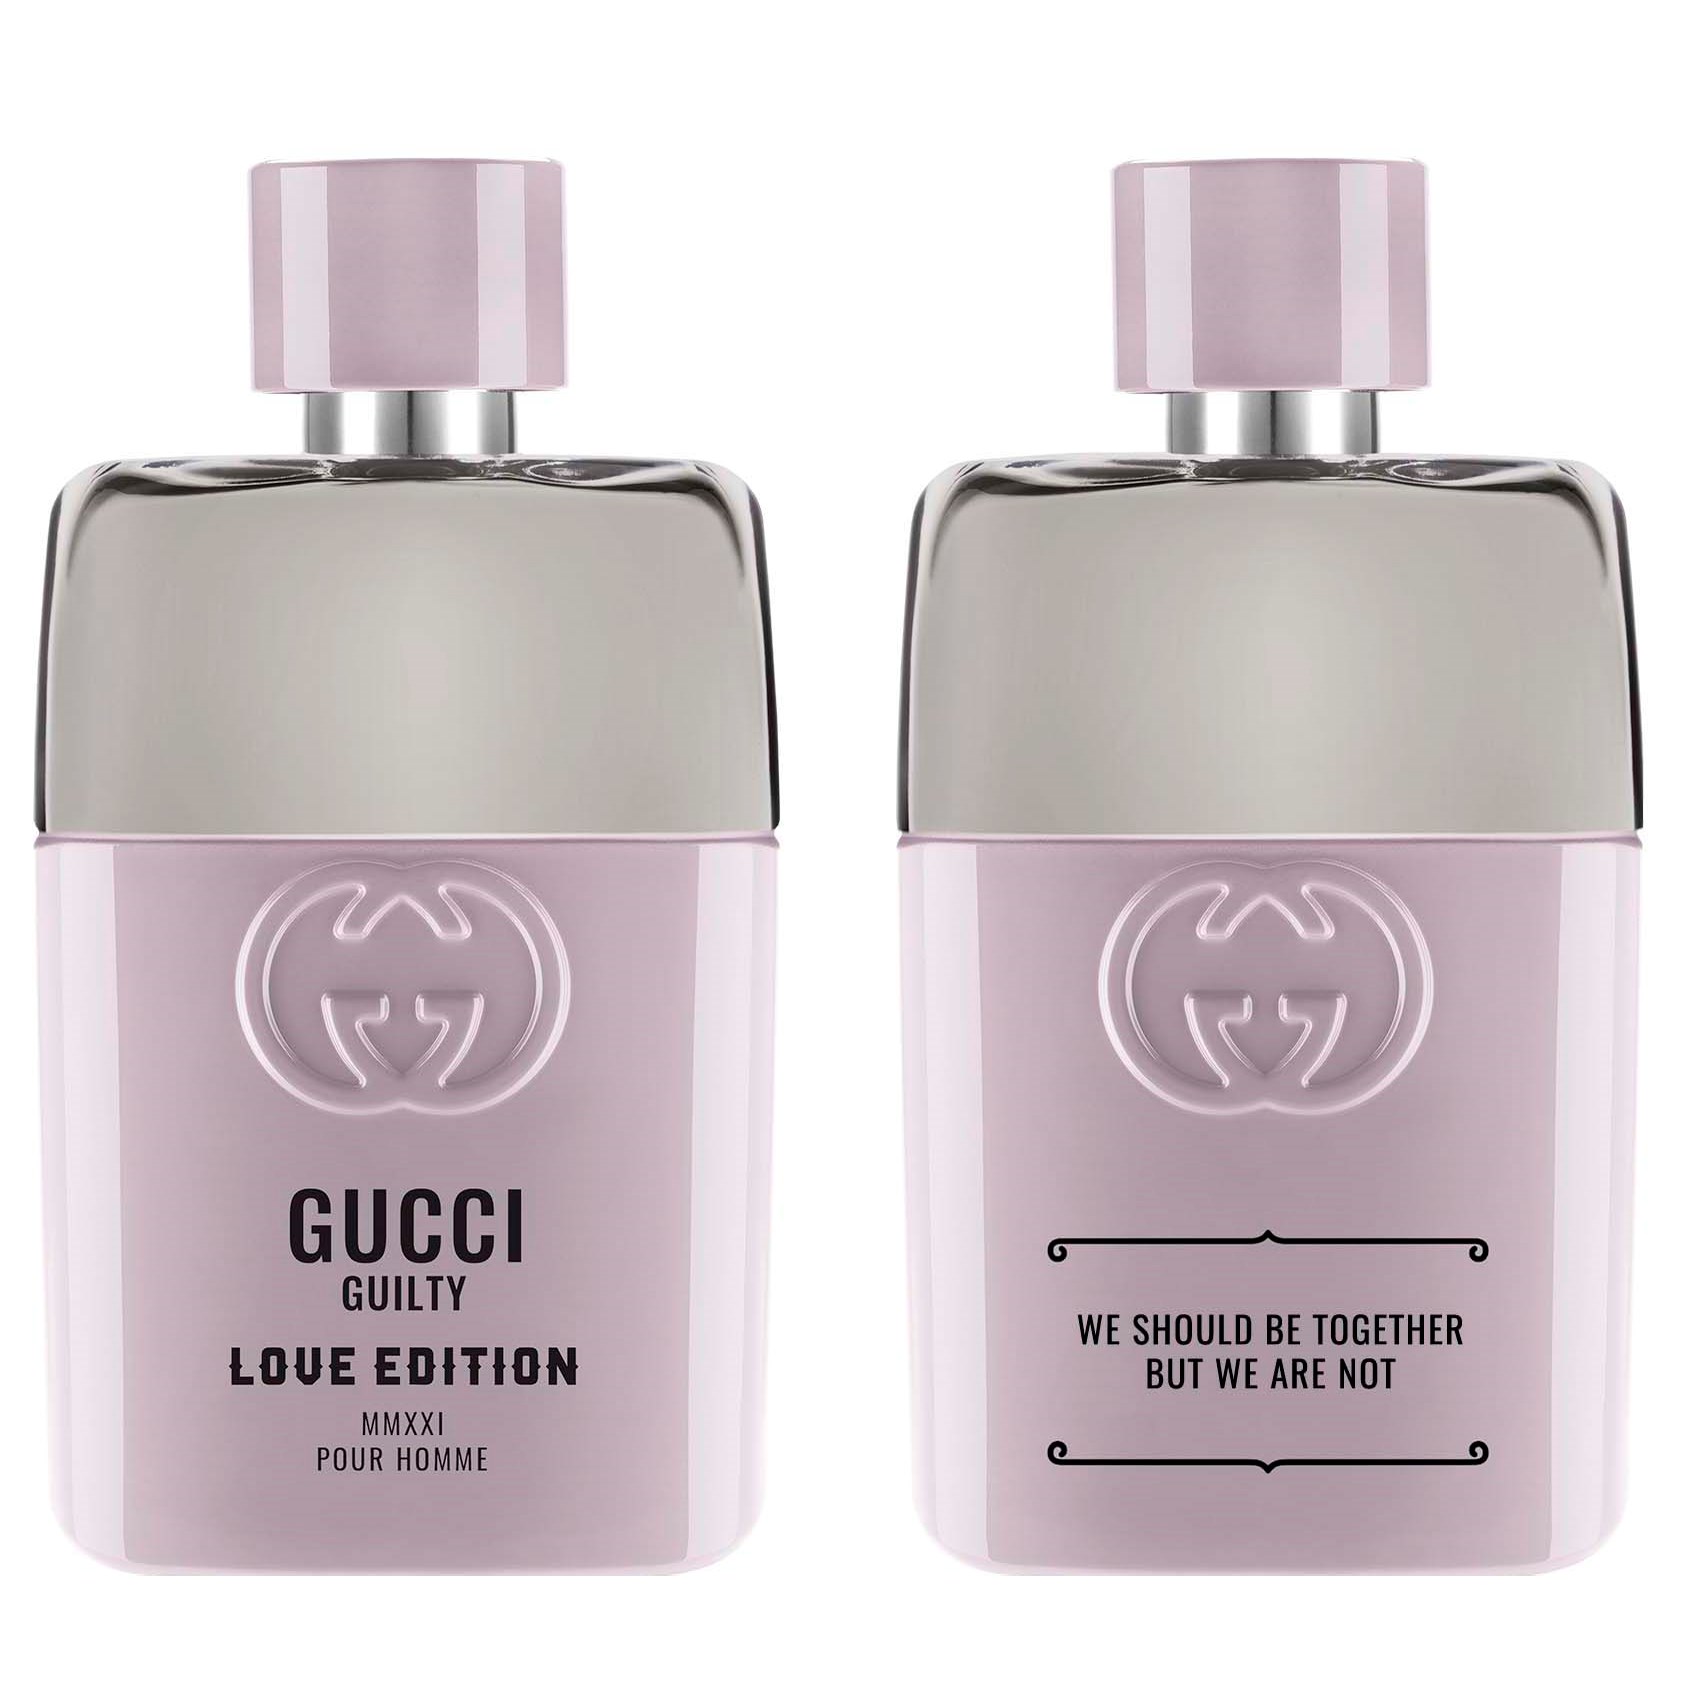 Gucci Guilty  Love Edition MMXXI Pour Homme EdT 50 ml